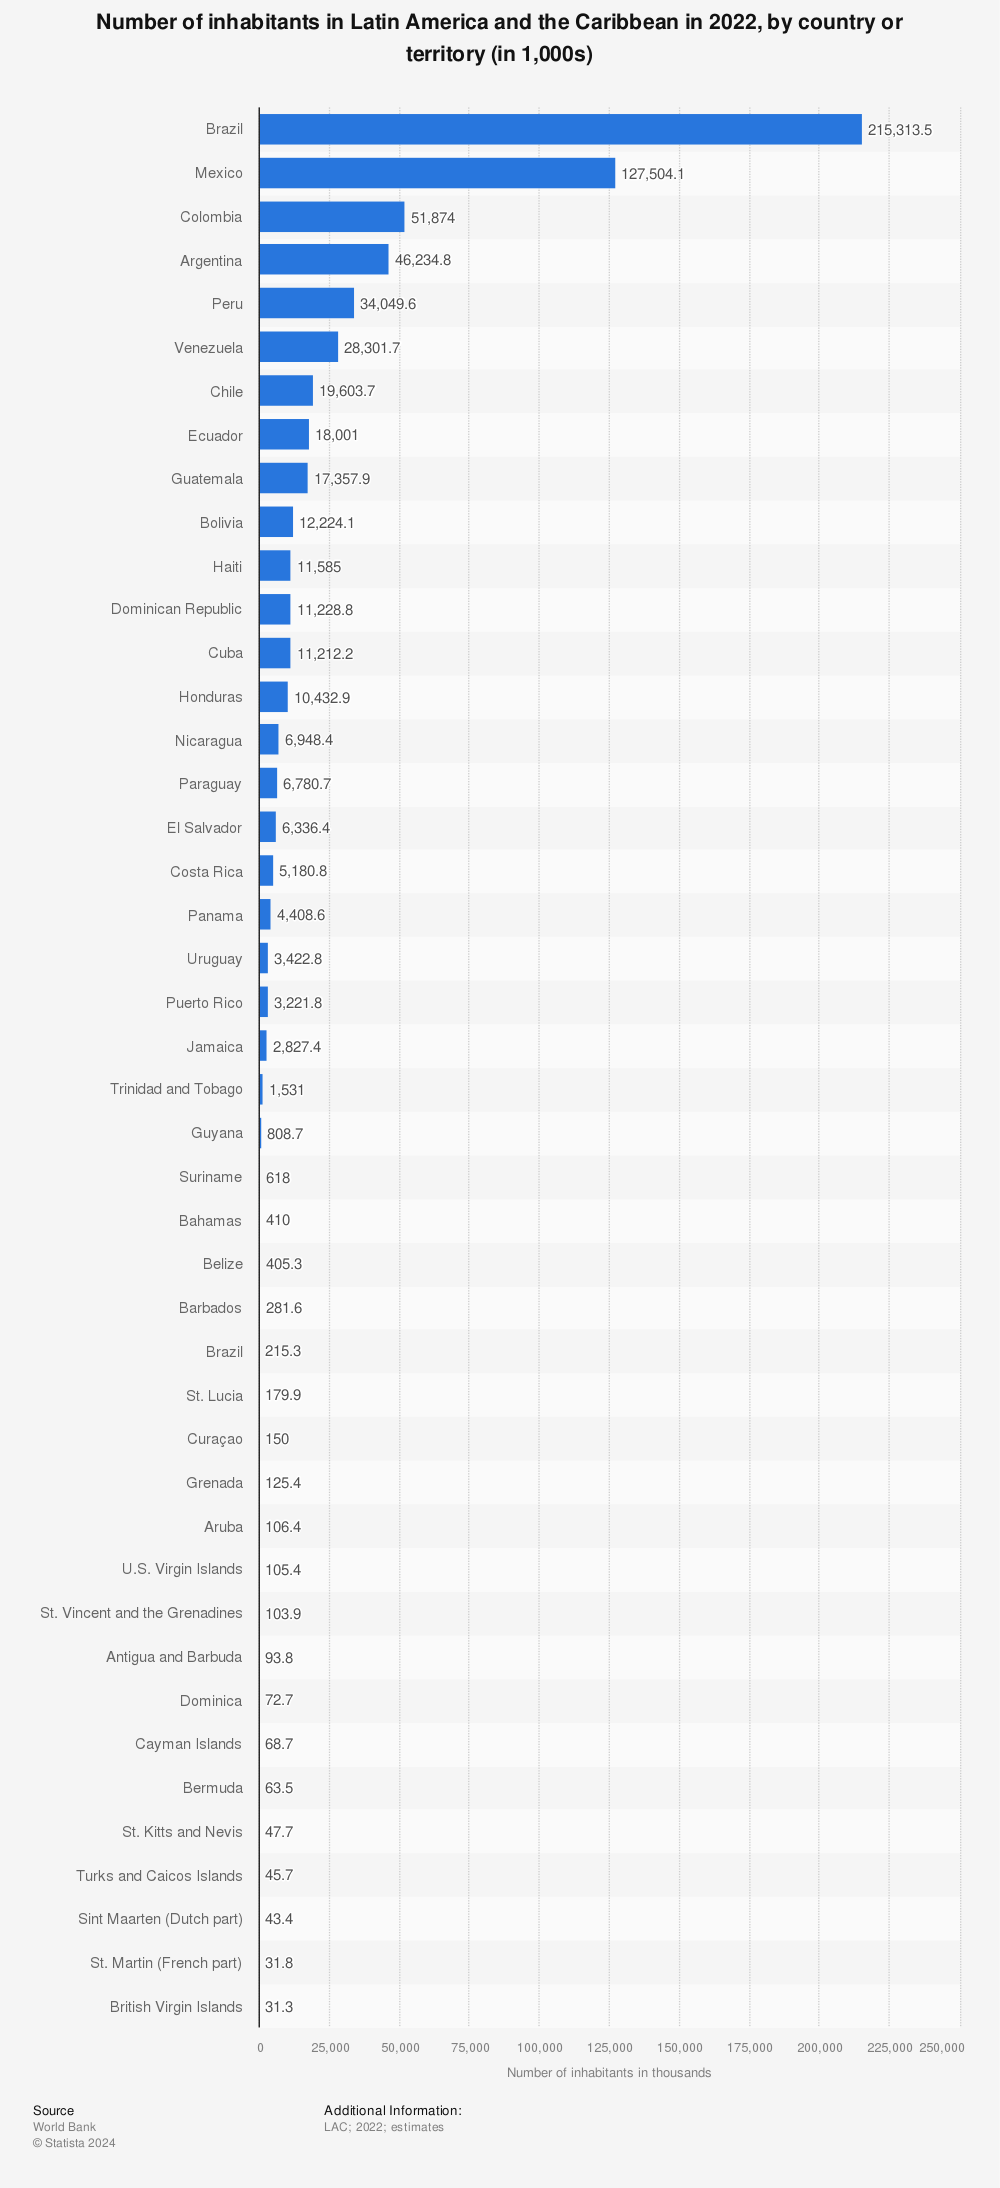 Statistic: Number of inhabitants in Latin America and the Caribbean in 2020, by country (in millions) | Statista